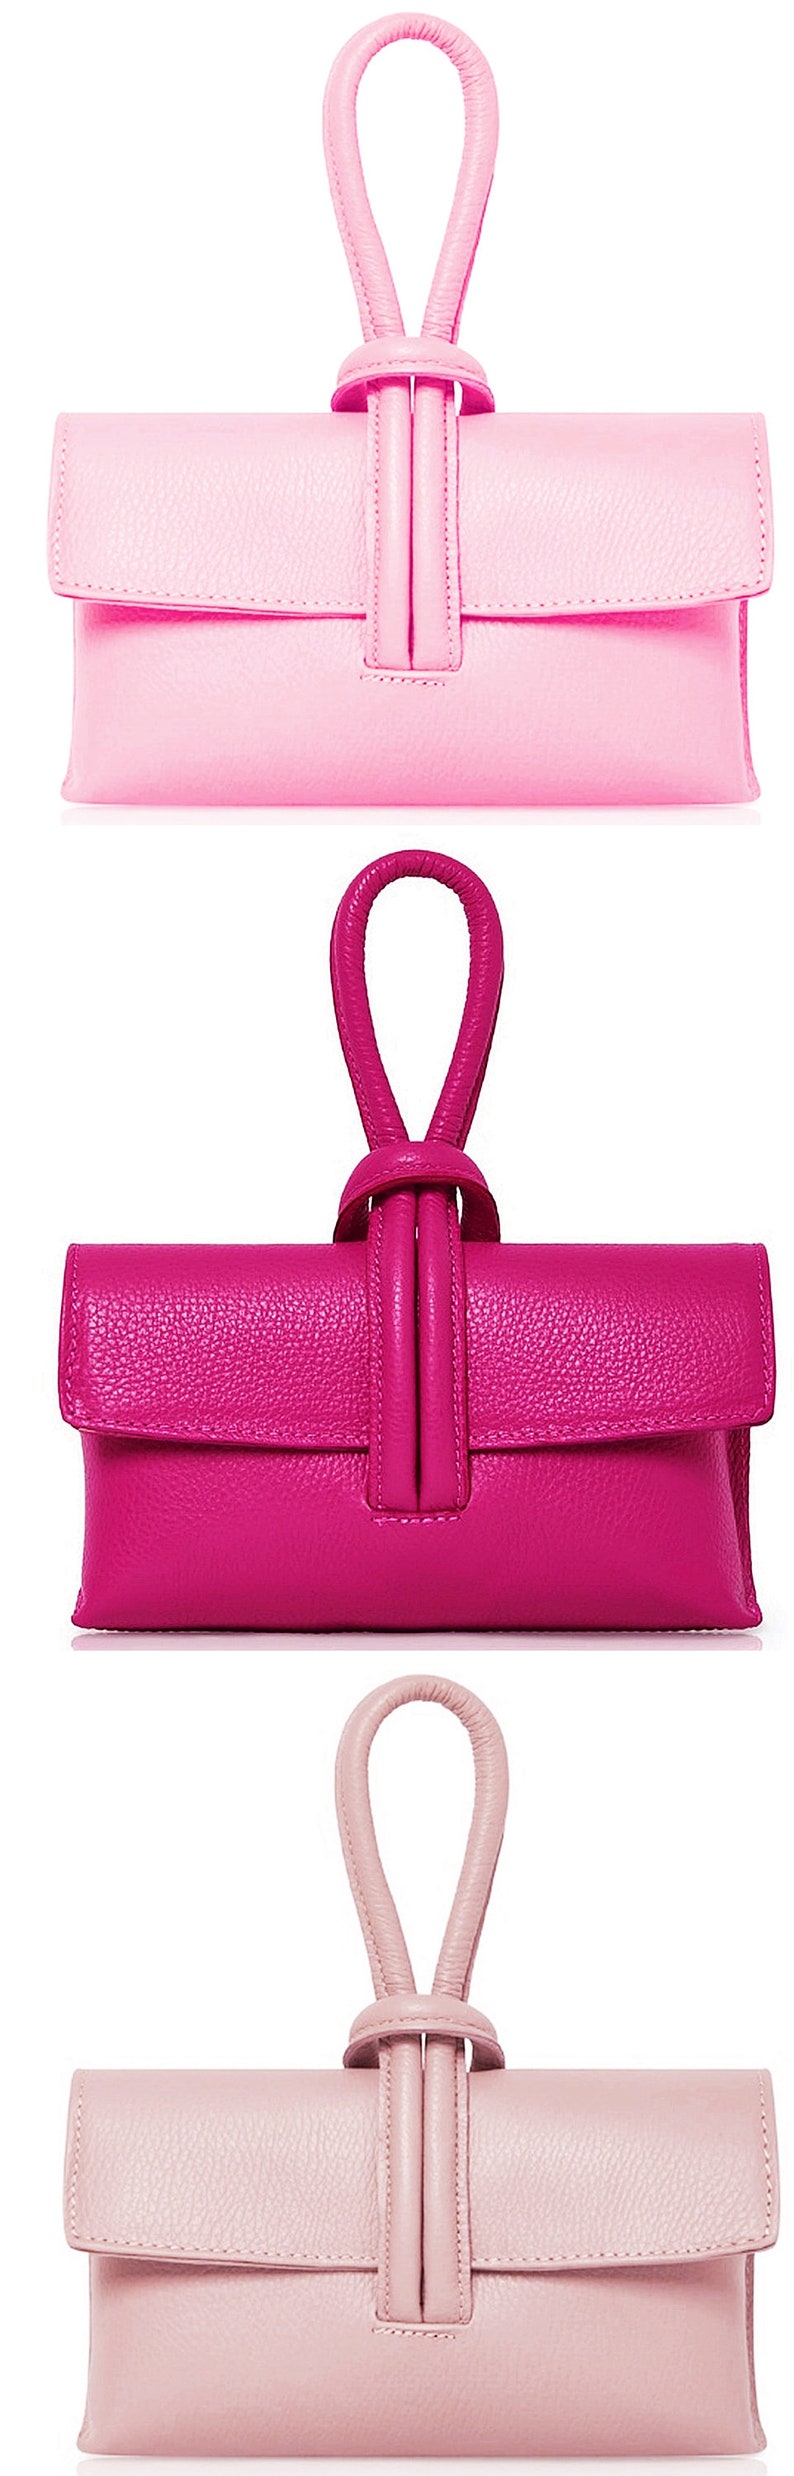 Pink Clutch Crossbody Bag, Pink Clutch Leather Bag, Leather Wristlet Bag, Knot Loop Handle, Wedding Bag, Party Bag, Womens Gift P&W Fuchsia Pink